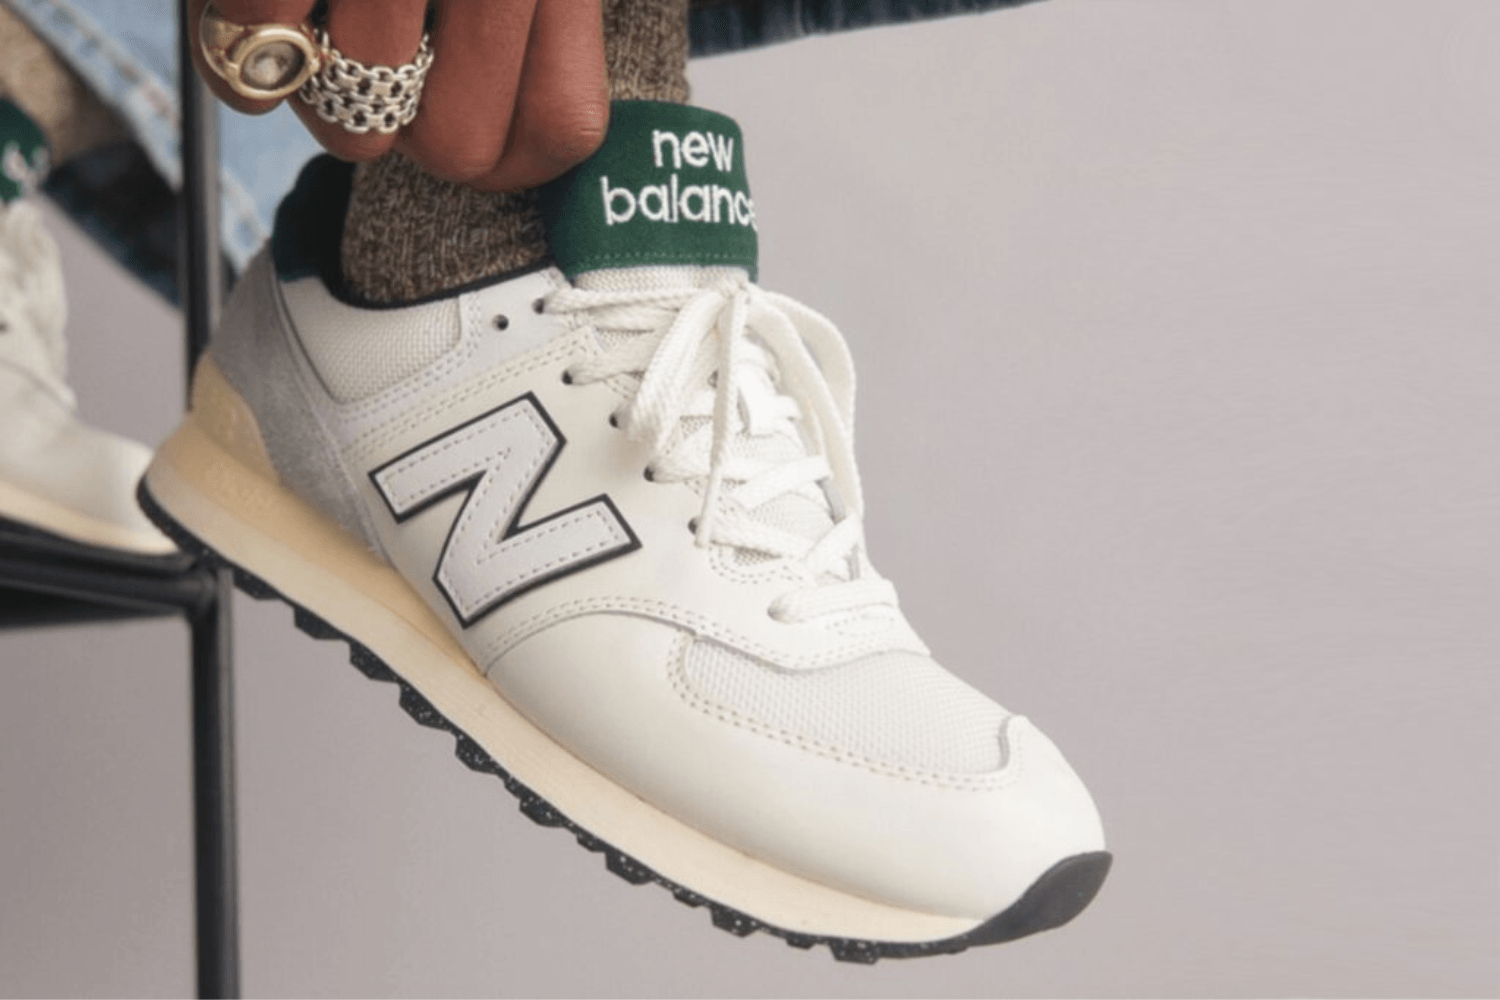 Popular New Balance 574 colorways you don't want to miss